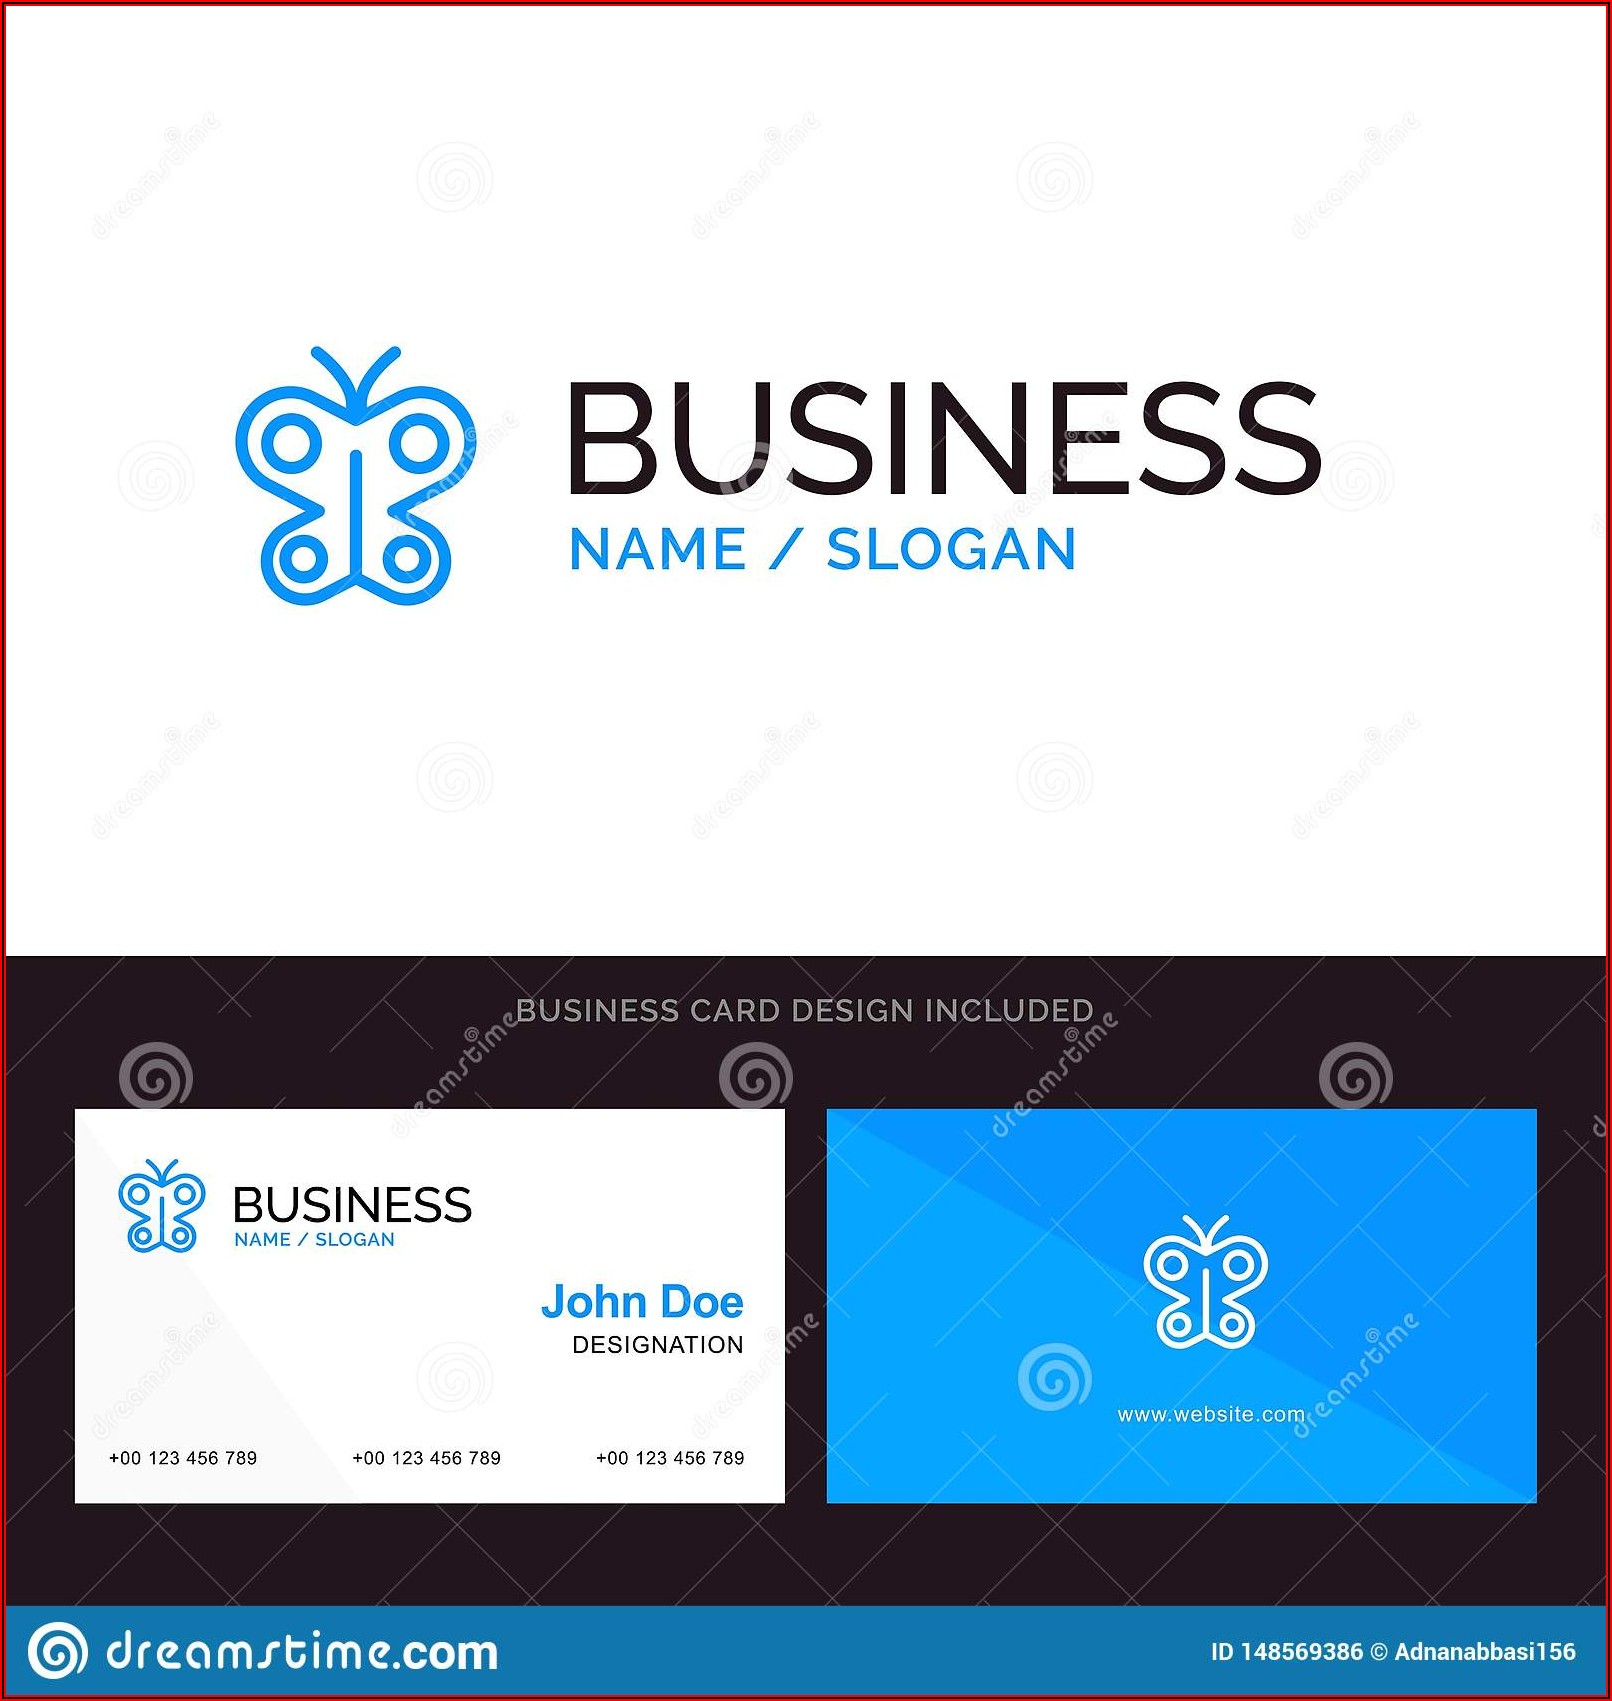 Butterfly Business Card Template